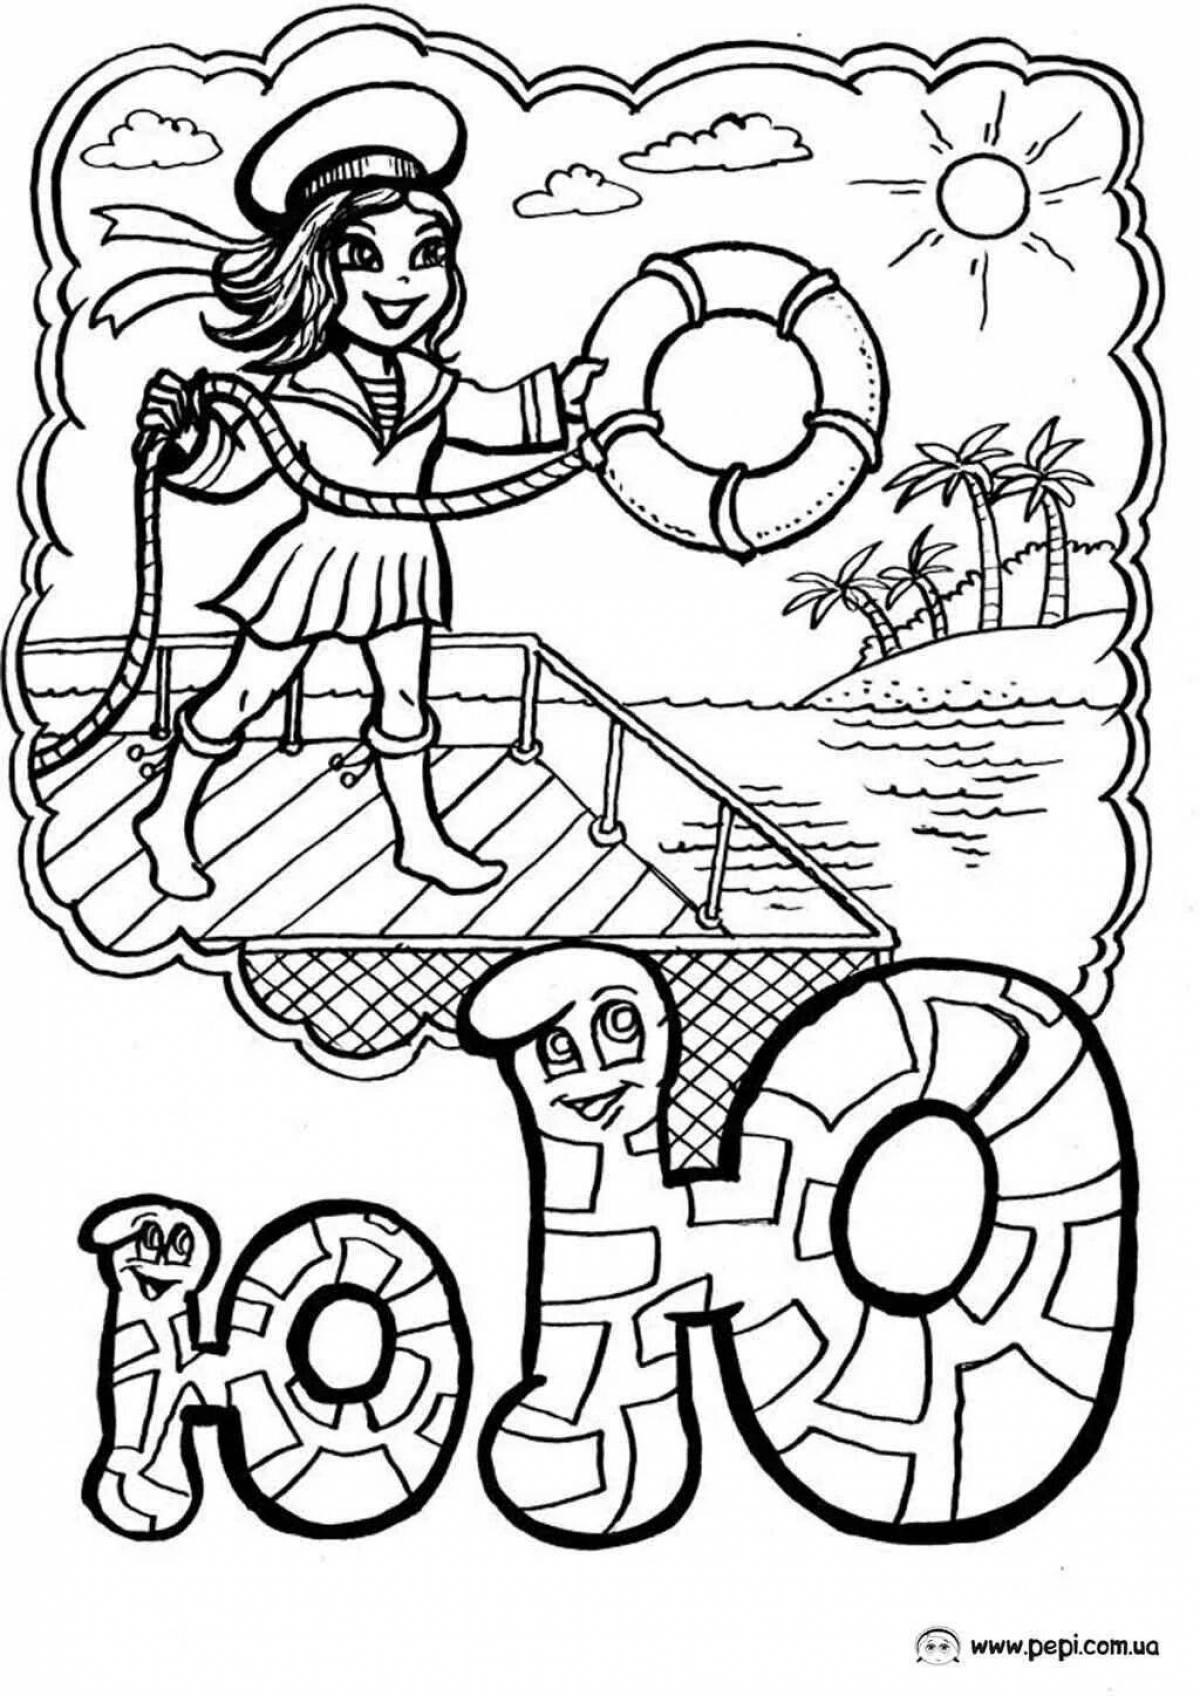 Great hut coloring book for kids